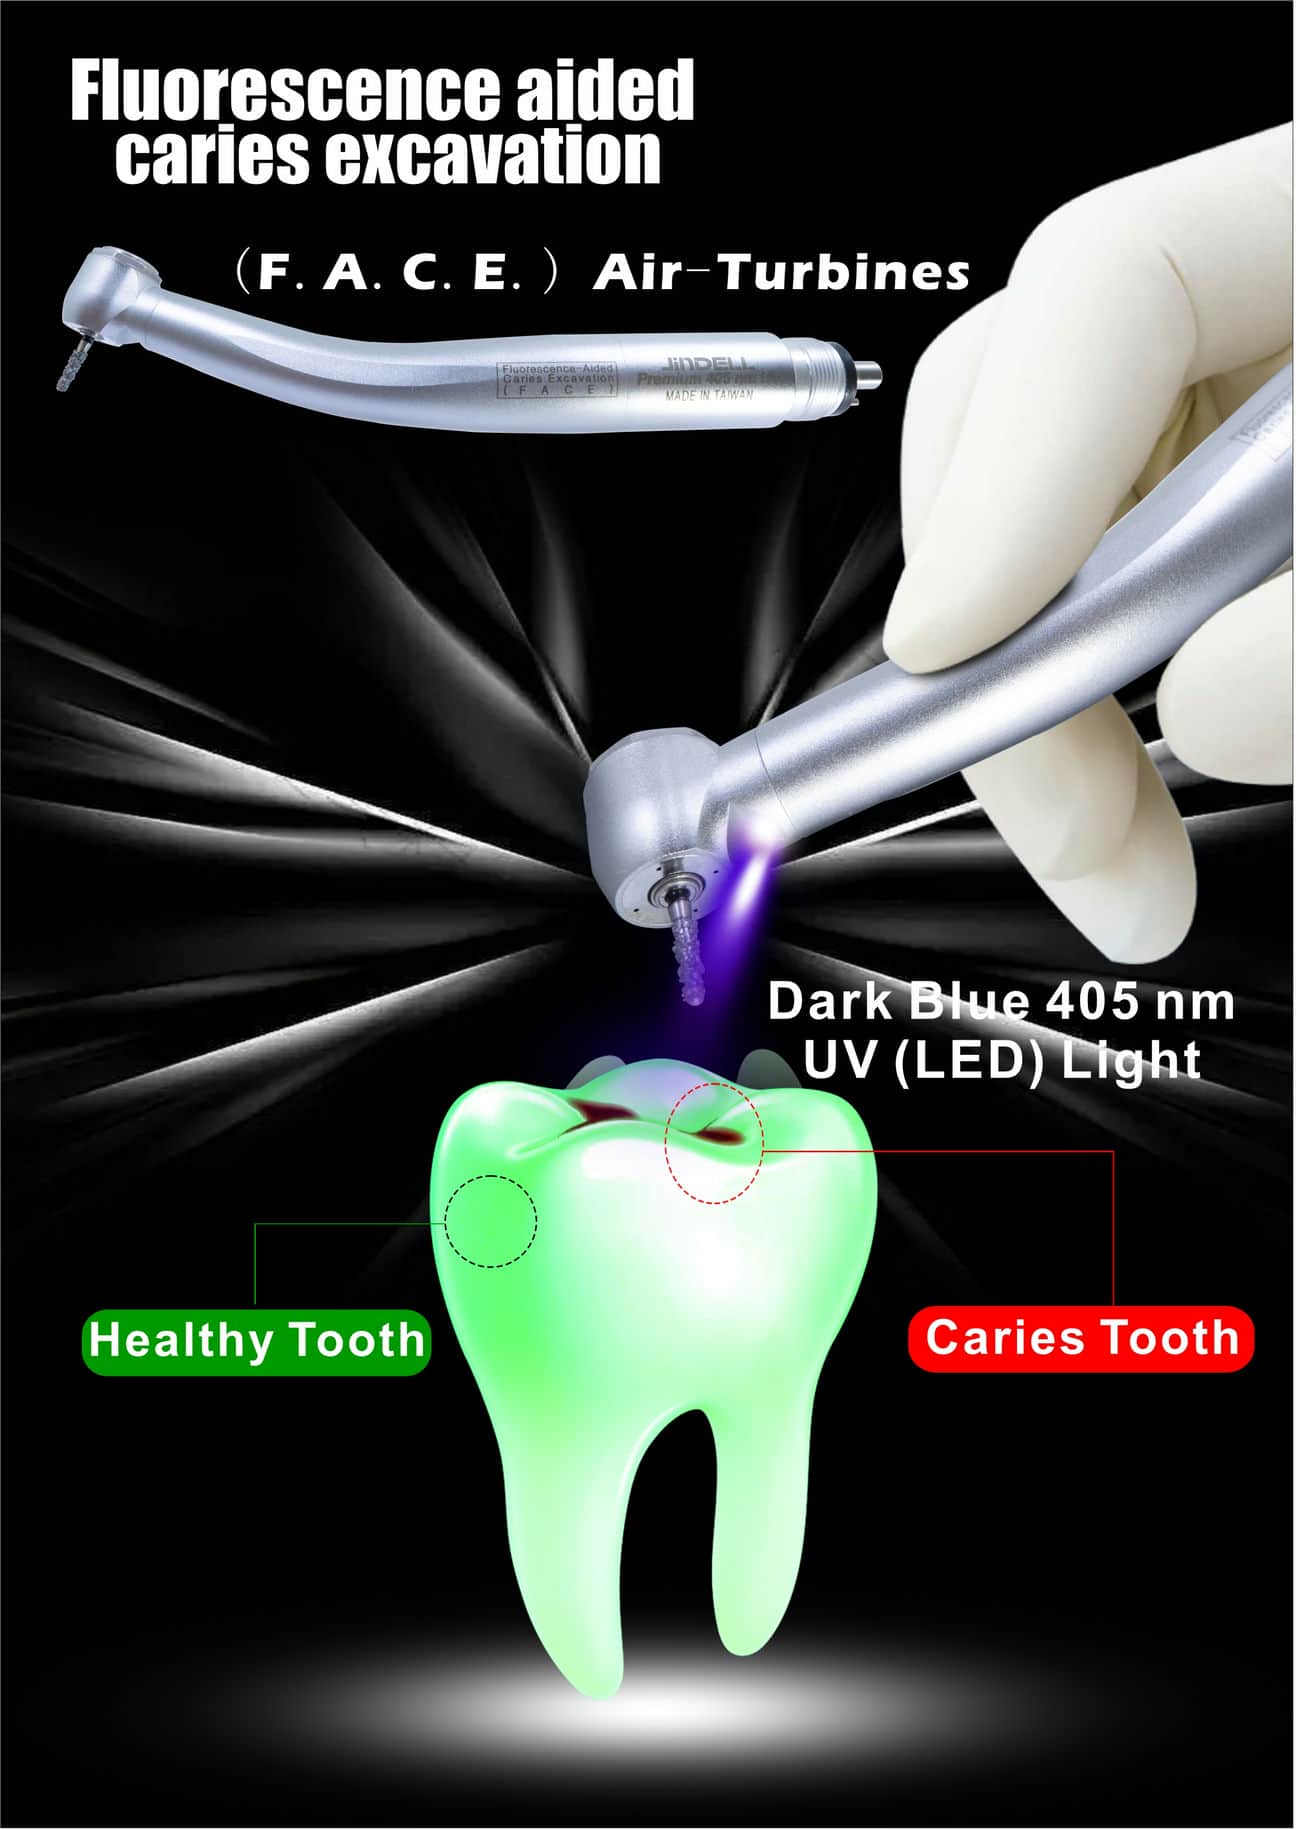 Fluorescence aided caries excavation (FACE) Turbines